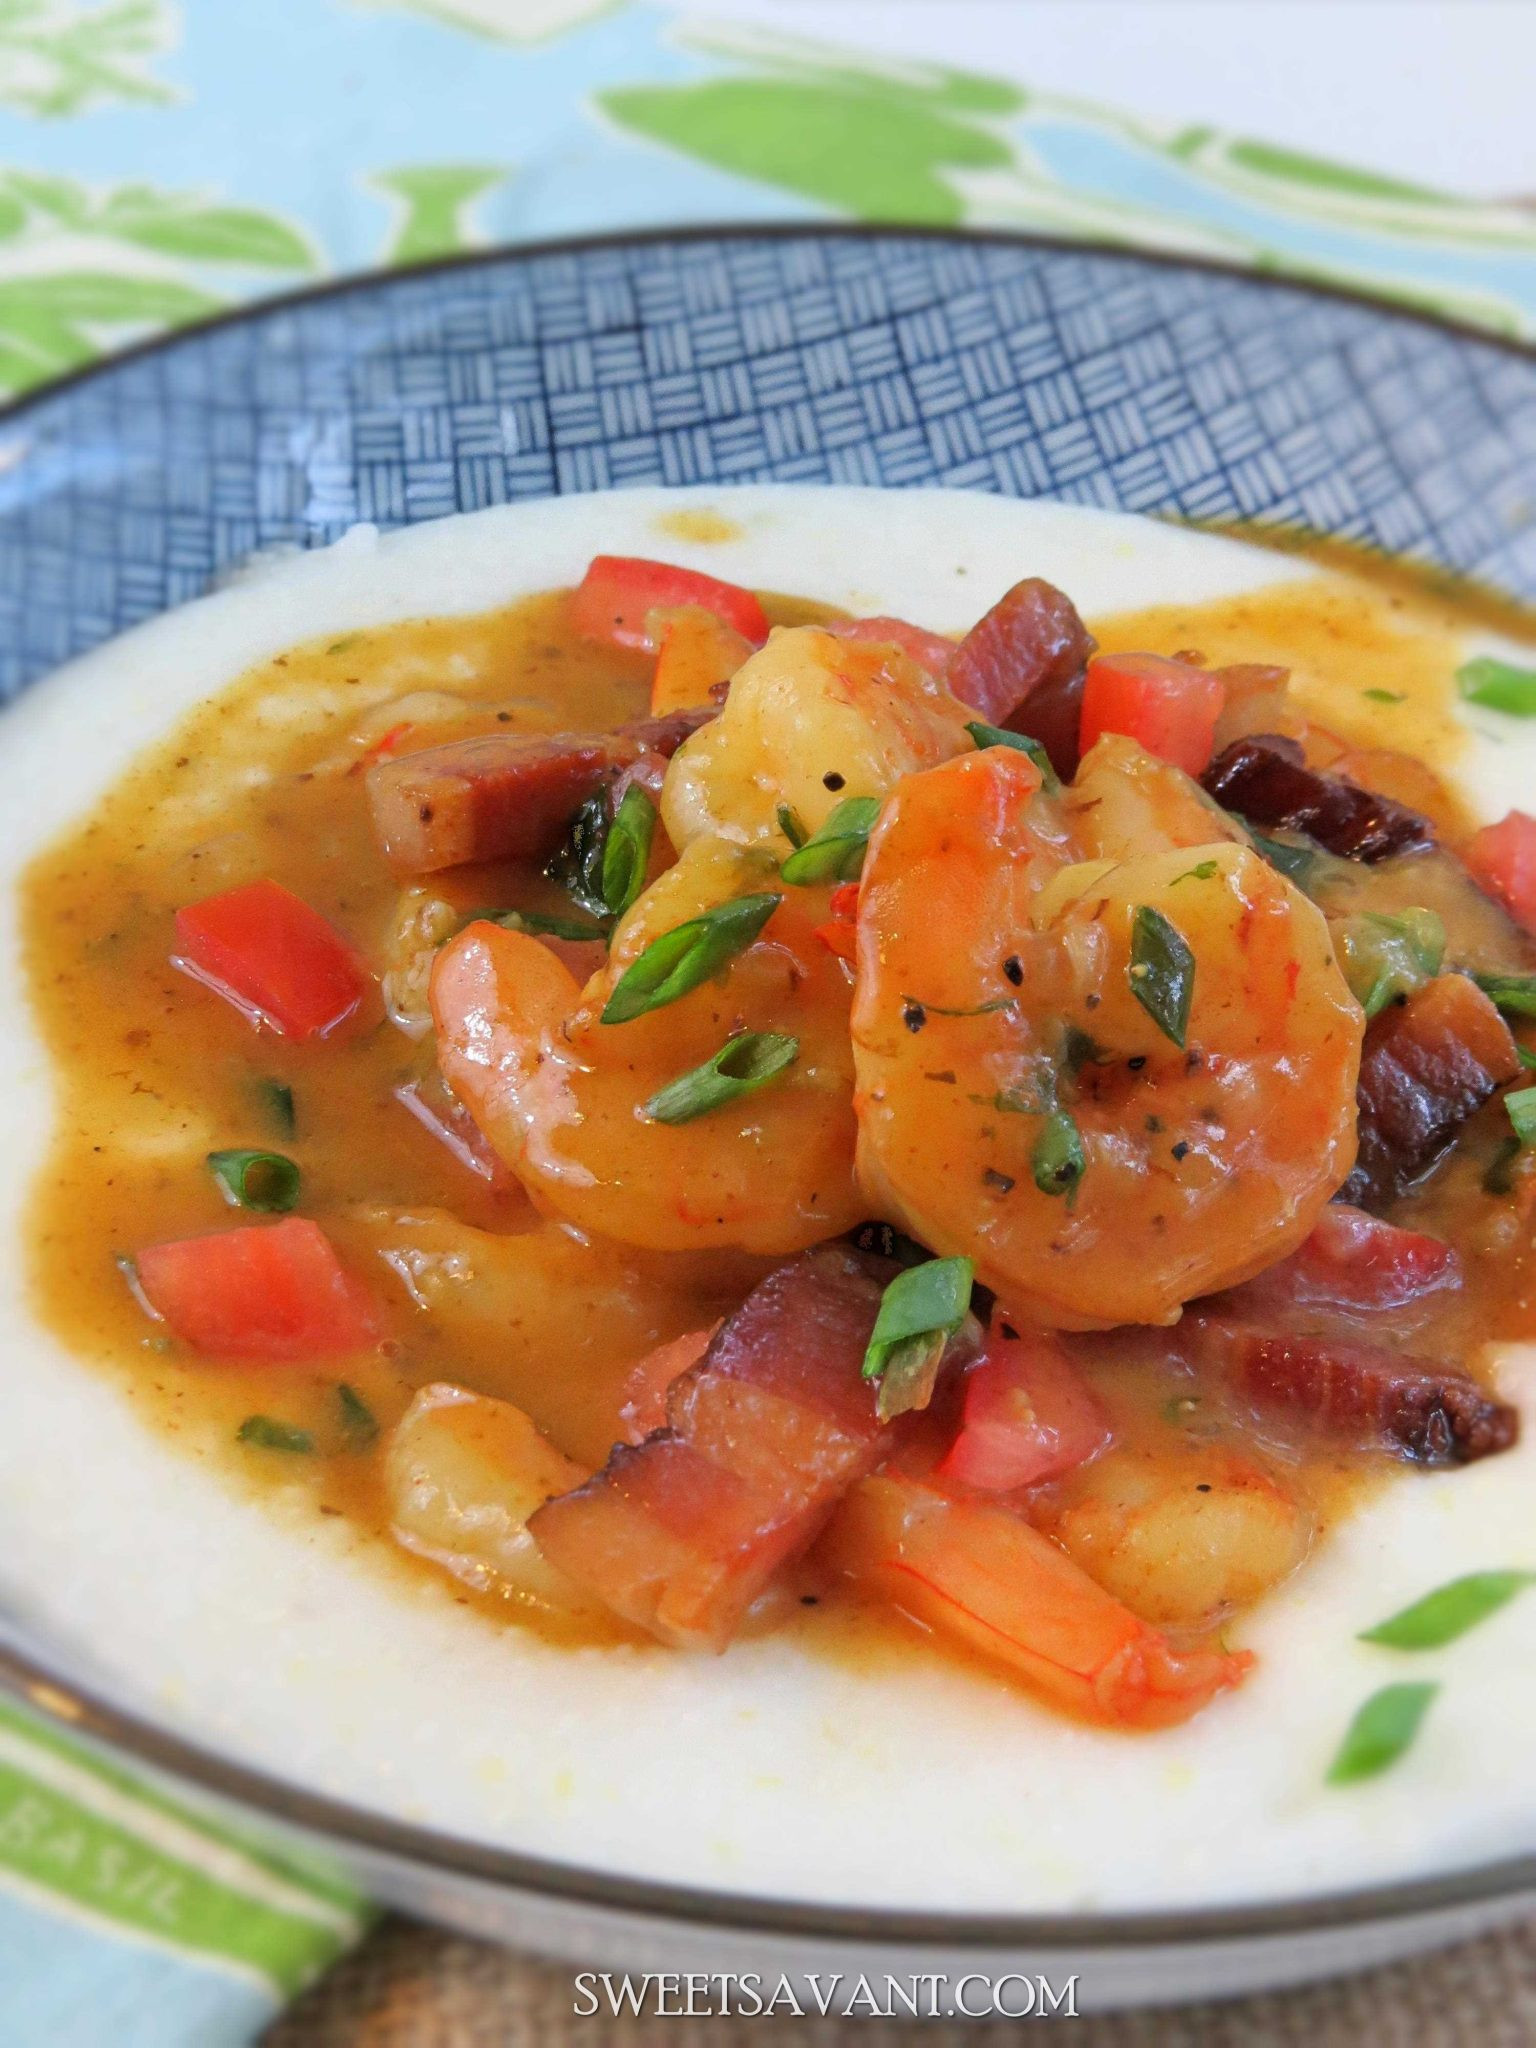 Recipes For Shrimp And Grits
 The best shrimp and grits recipe Charleston style Sweet